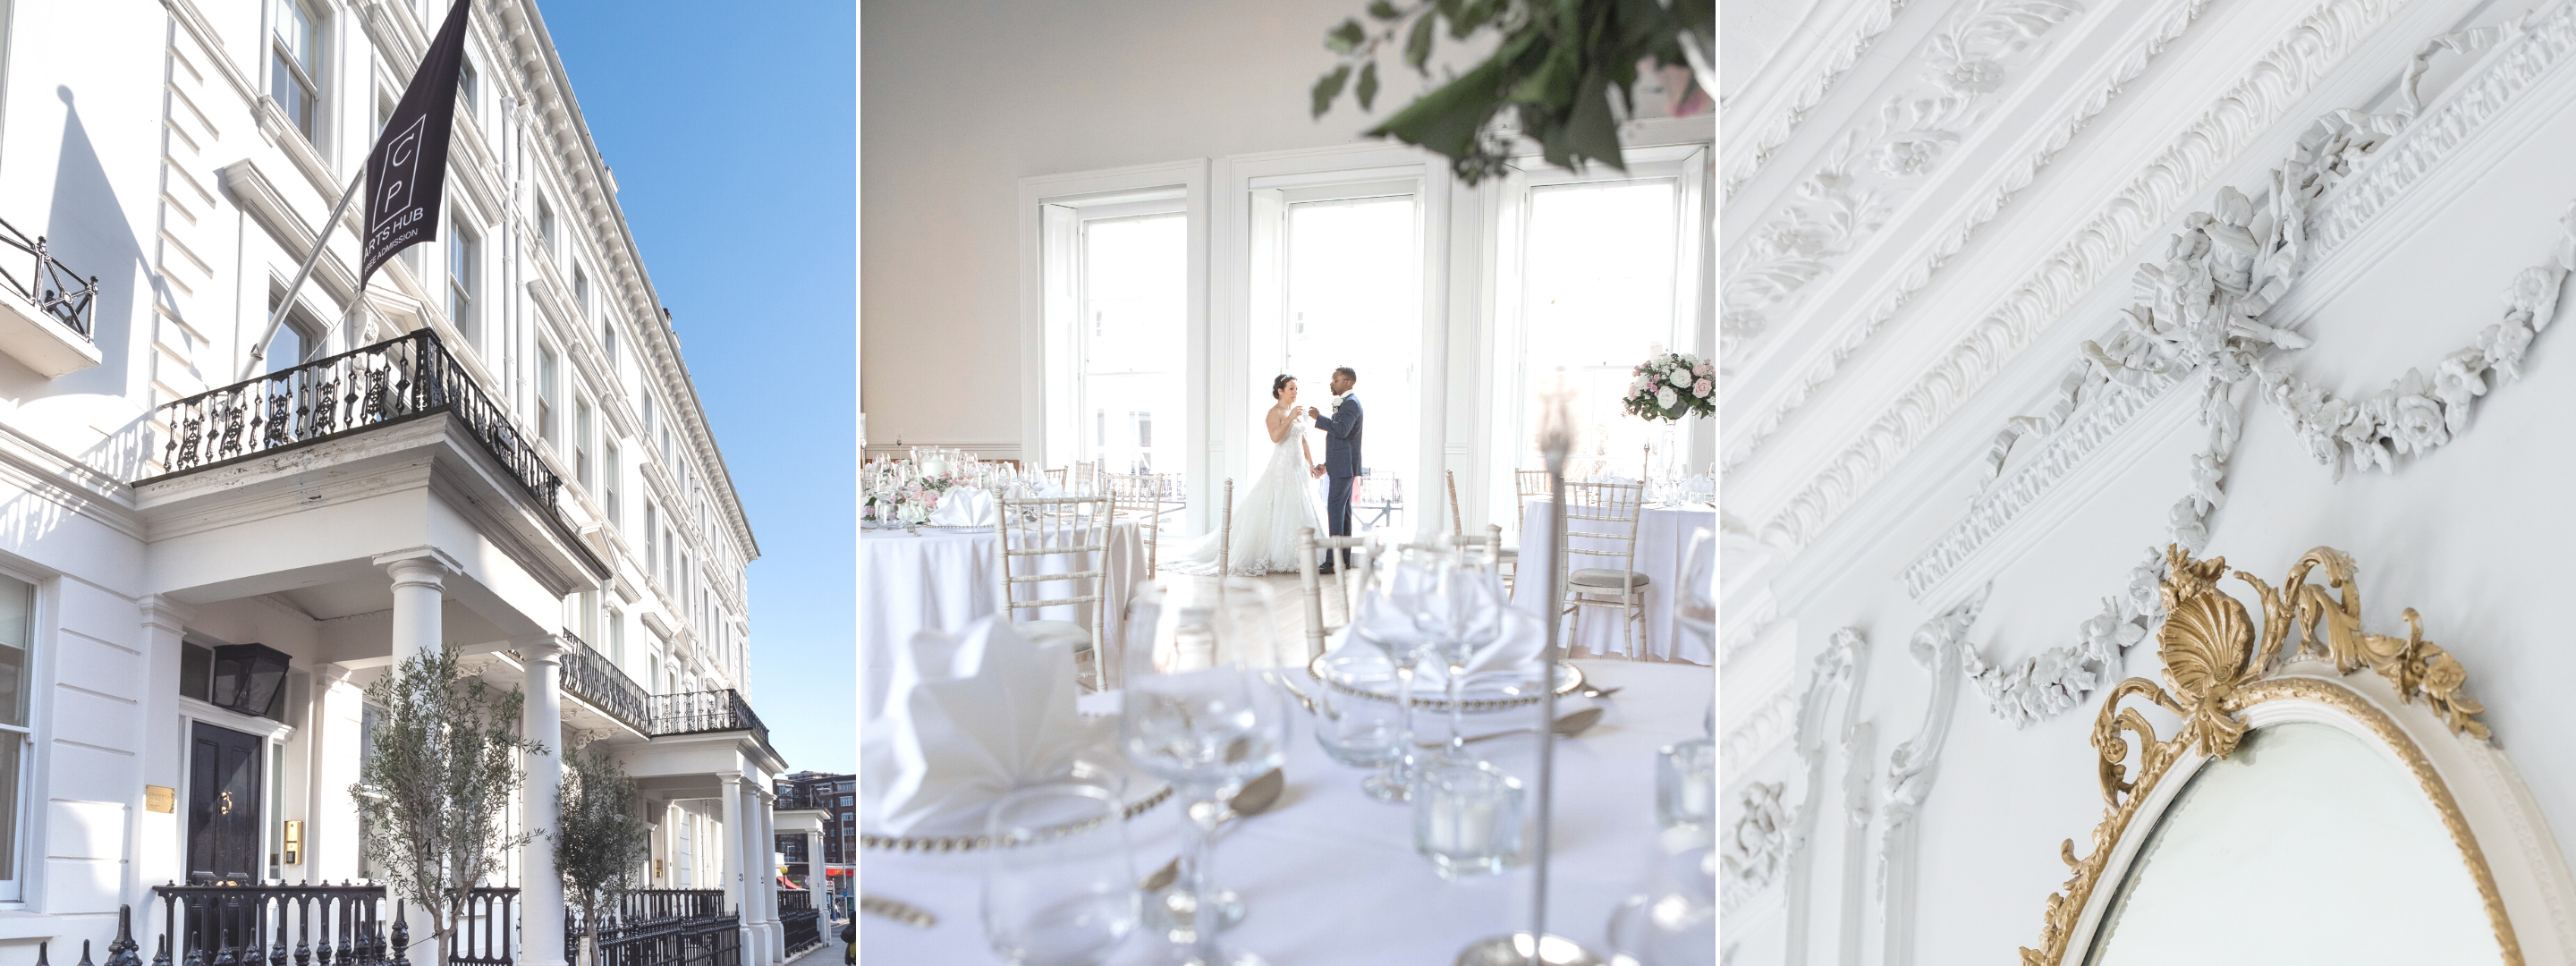 Three images showing the outside of the venue, a set dining room with wedding couple mid dance and of decorative details inside the venue